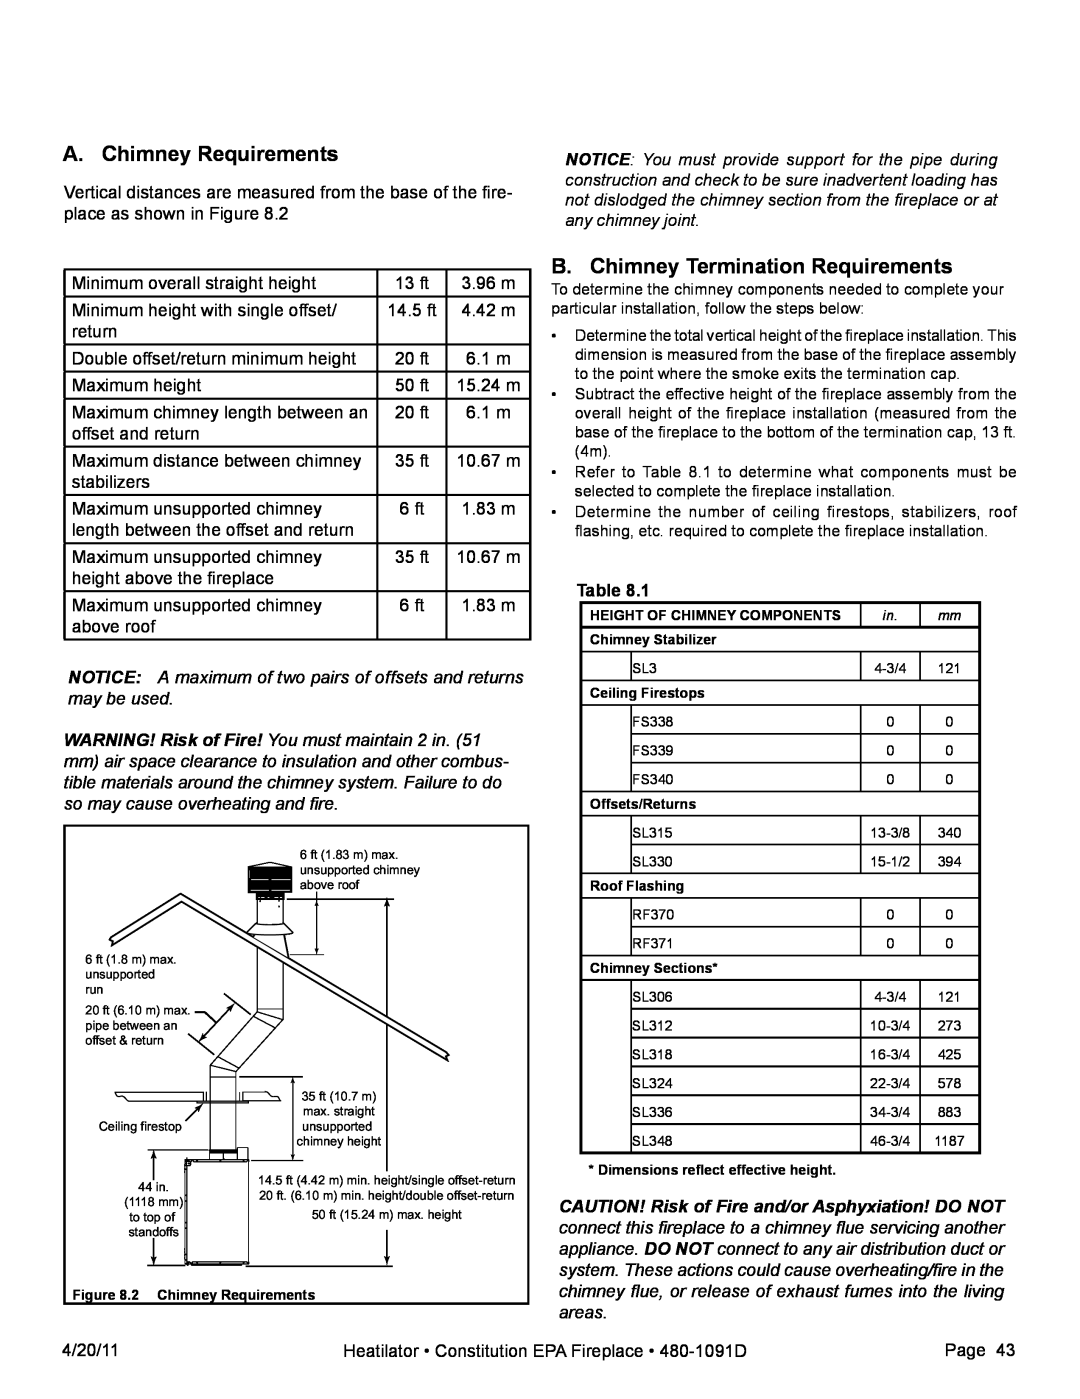 Heatiator C40 owner manual A. Chimney Requirements, B. Chimney Termination Requirements, Table 